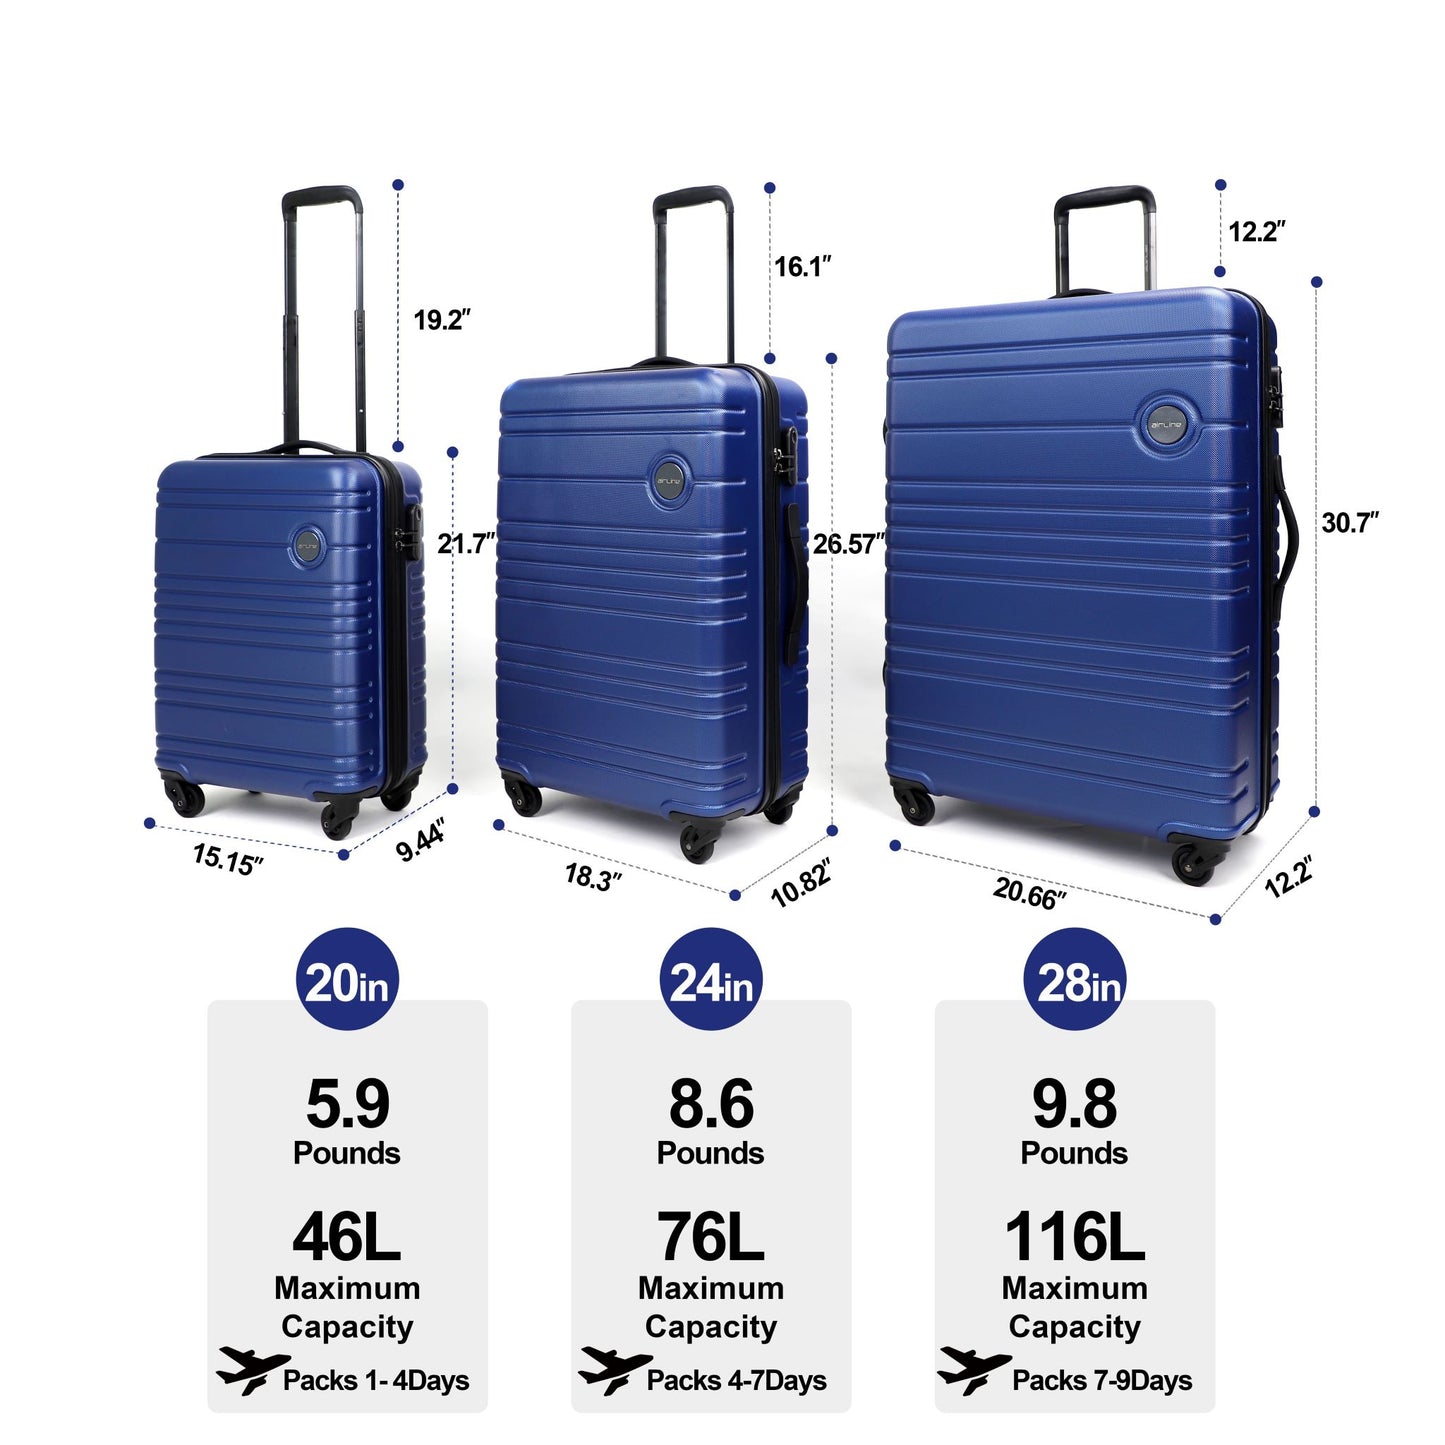 Airline_Luggage_Sets_3peice_Blue_Size_N12721005